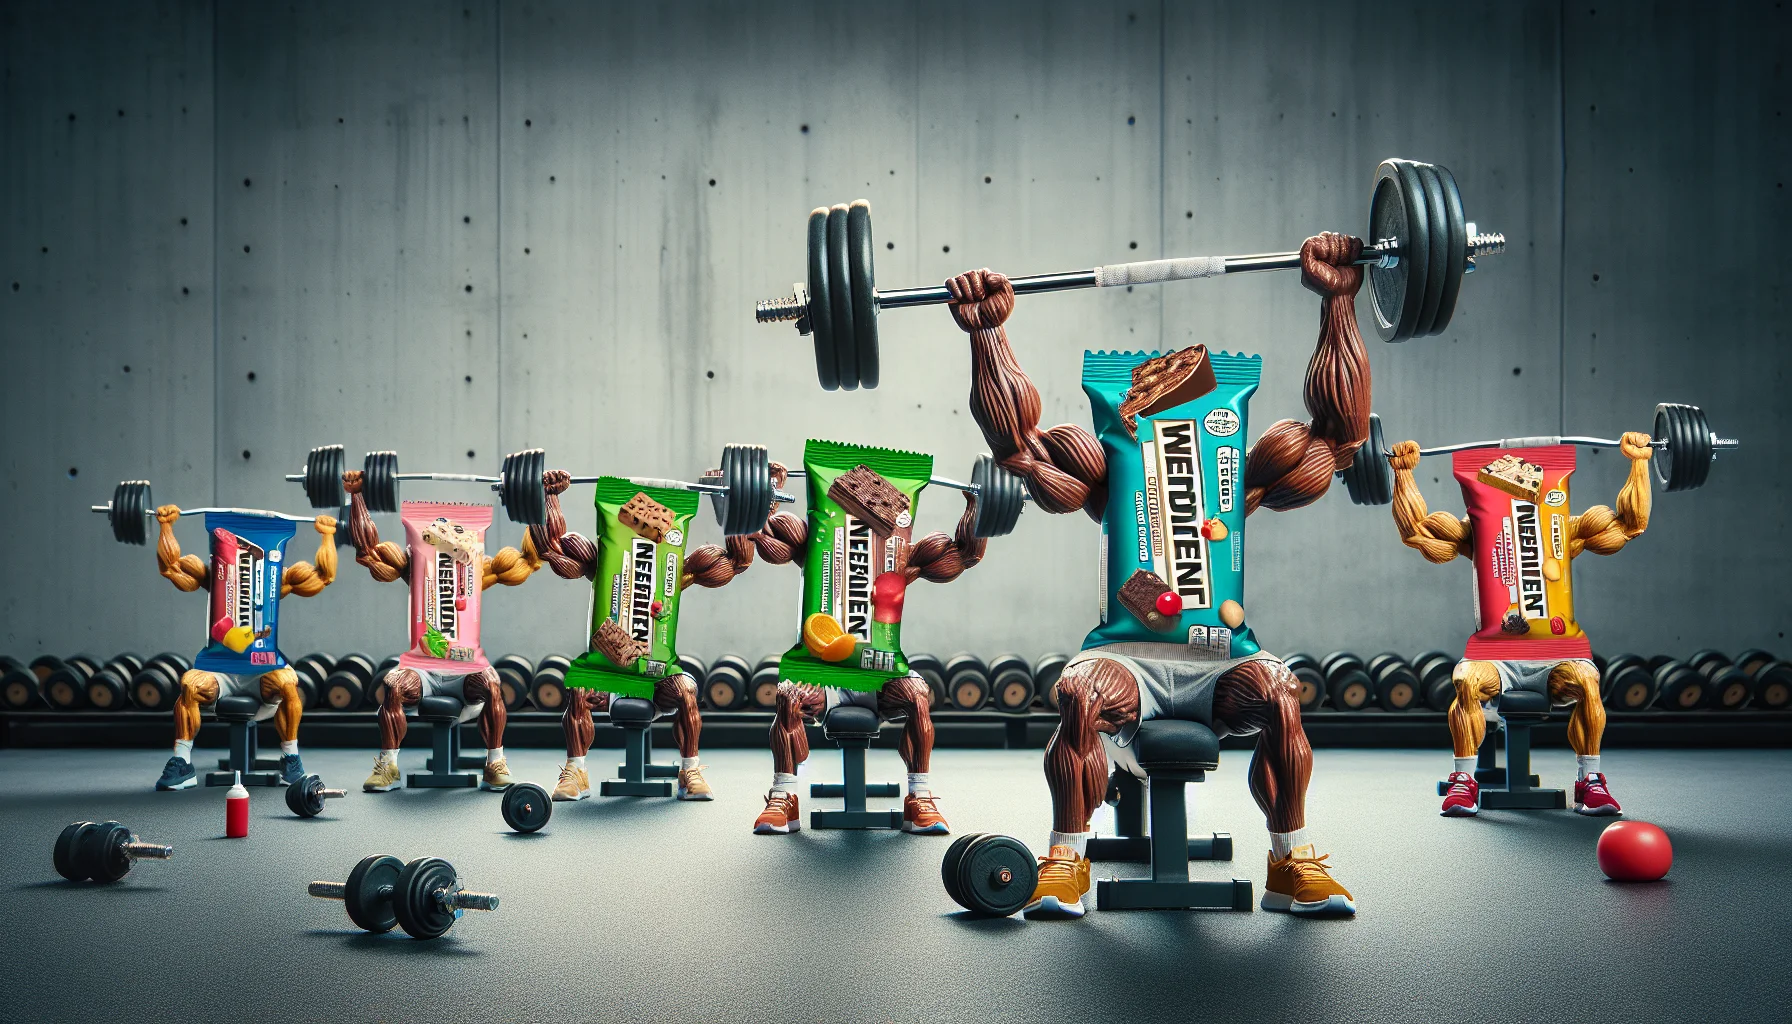 Create an amusing and realistic image of various flavors of protein bars lifting small dumbbells. Each protein bar is representing itself as an athlete, in a gym setting. The idea should be presented in a way that humorously encourages the usage of these supplements for athletic performance enhancement. The backproof background to accentuate the focus on the protein bars. Try to involve an element of comedy in the scene to make it enticing and engaging.